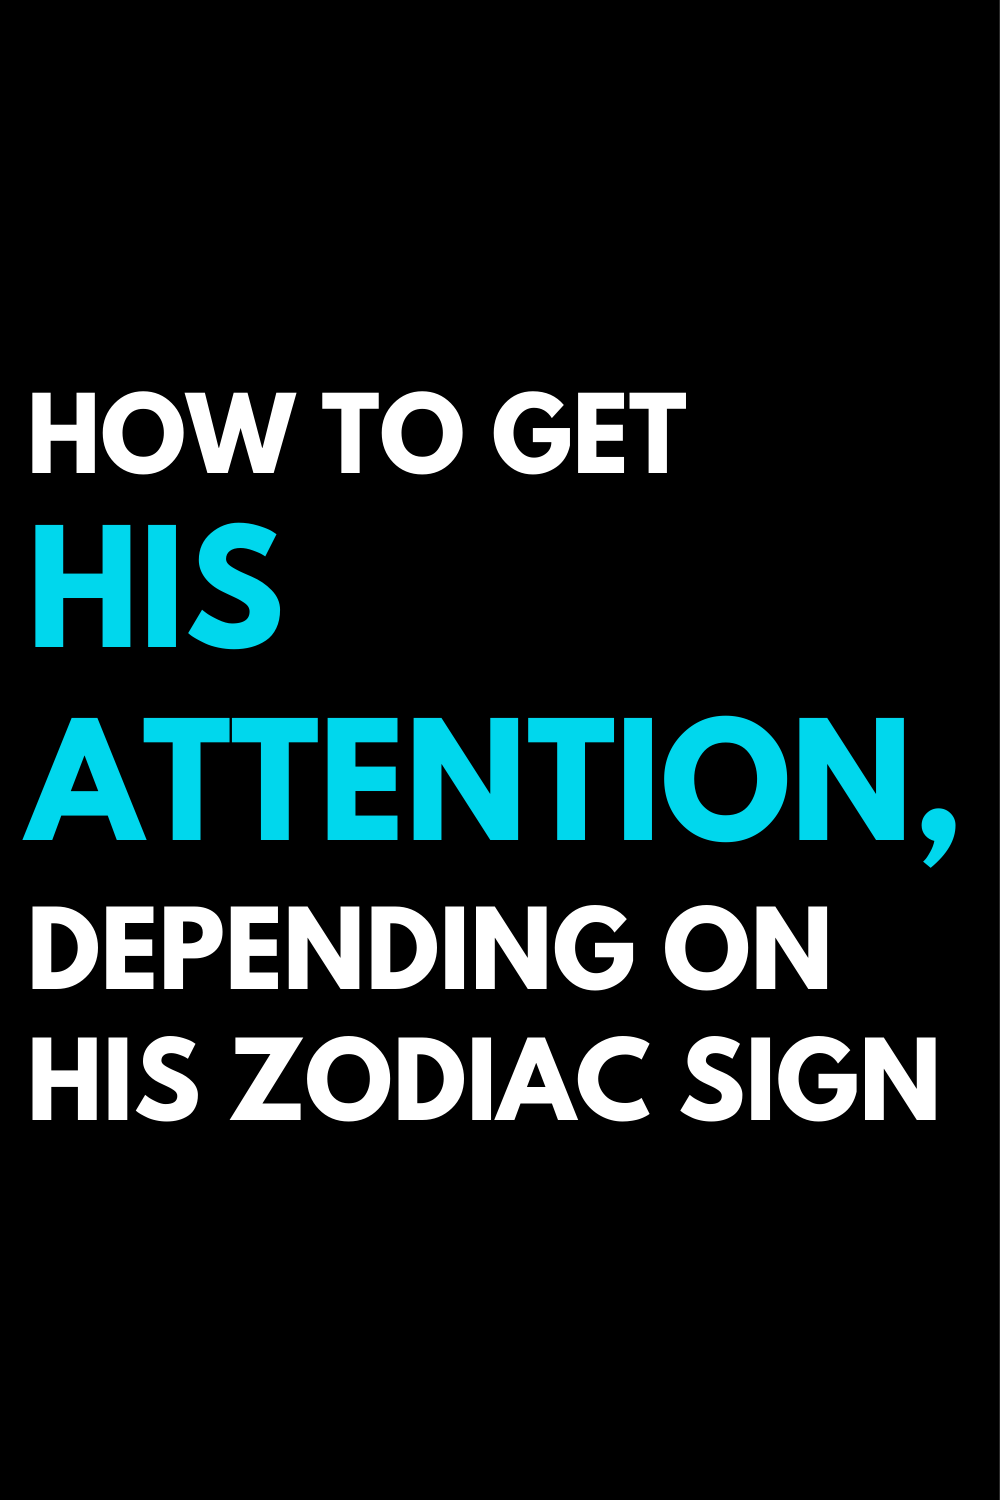 How to get his attention, depending on his zodiac sign